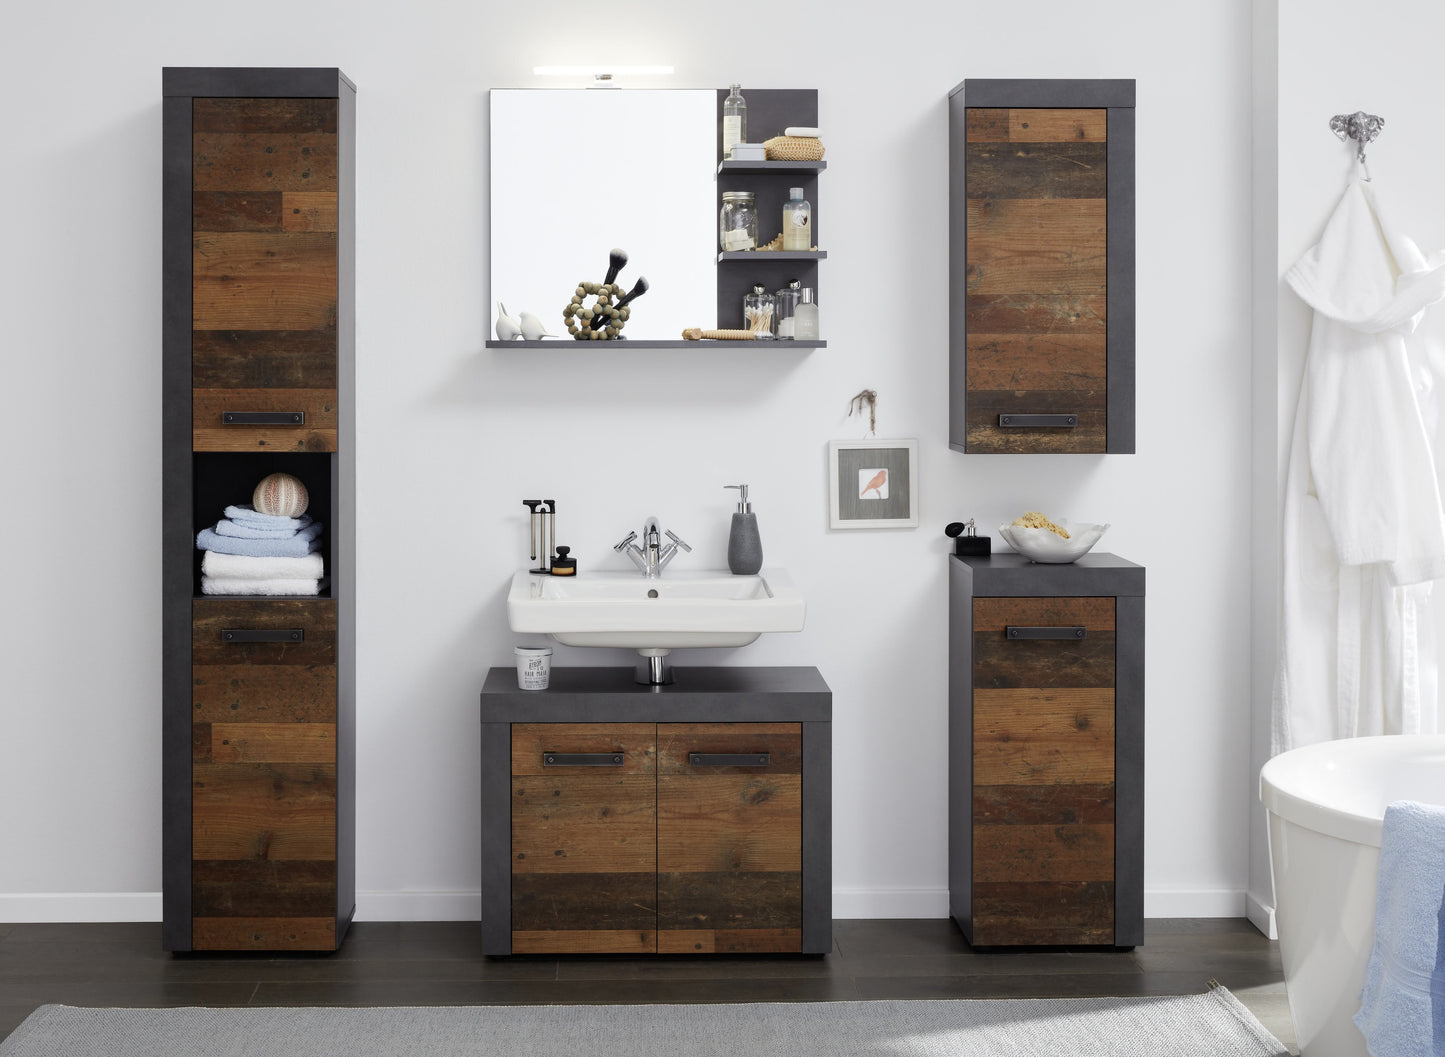 Nancy's Chicalote Bathroom Cabinet - Storage Cabinet - Brown and Gray - 33 x 79 x 23 cm